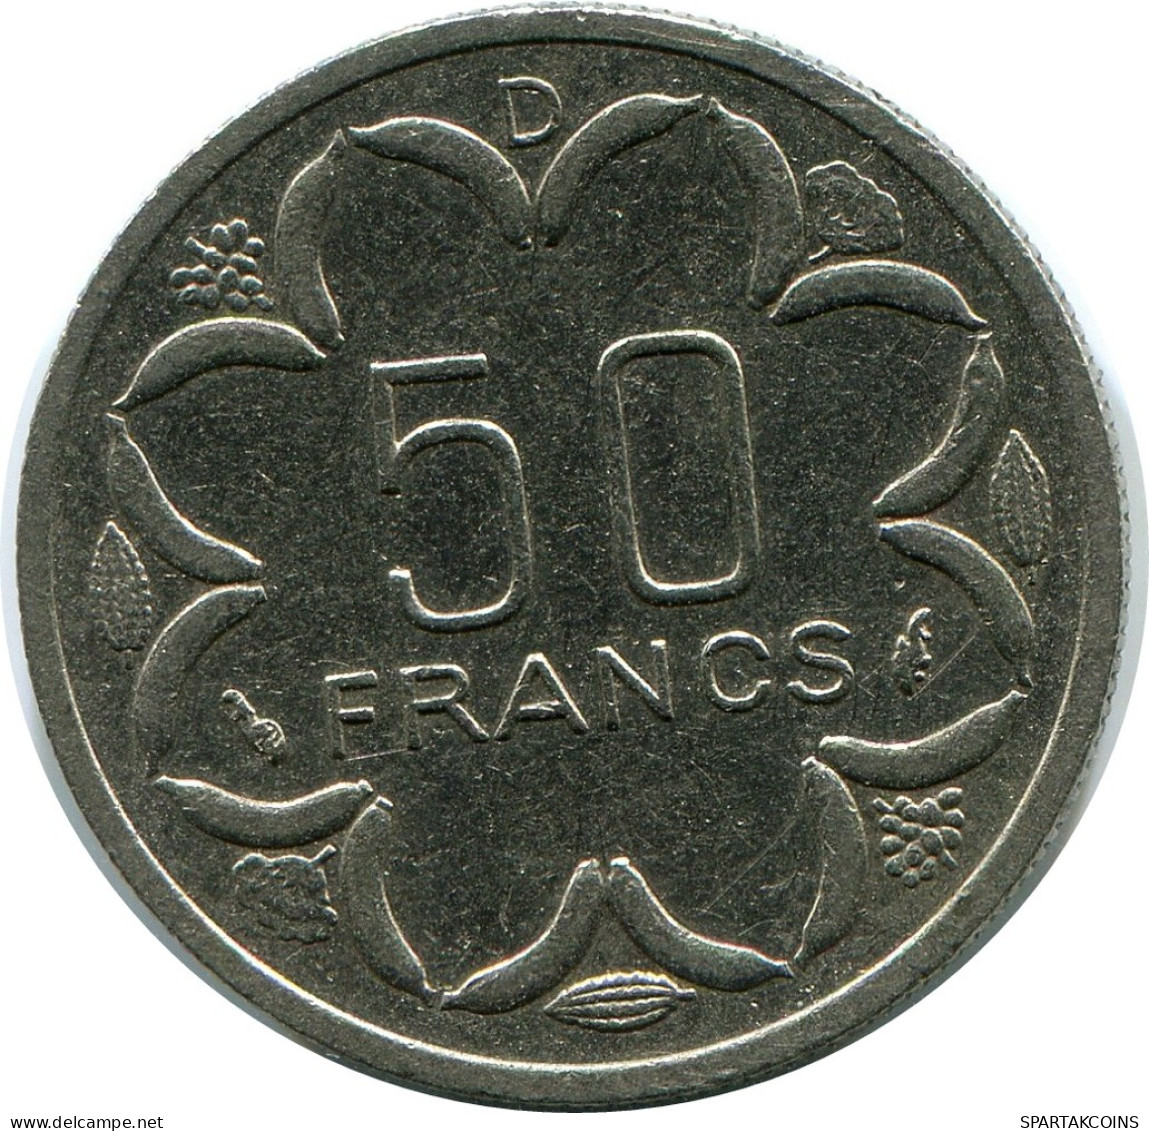 50 FRANCS CFA 1976 CENTRAL AFRICAN STATES (BEAC) Coin #AP867.U - Centraal-Afrikaanse Republiek